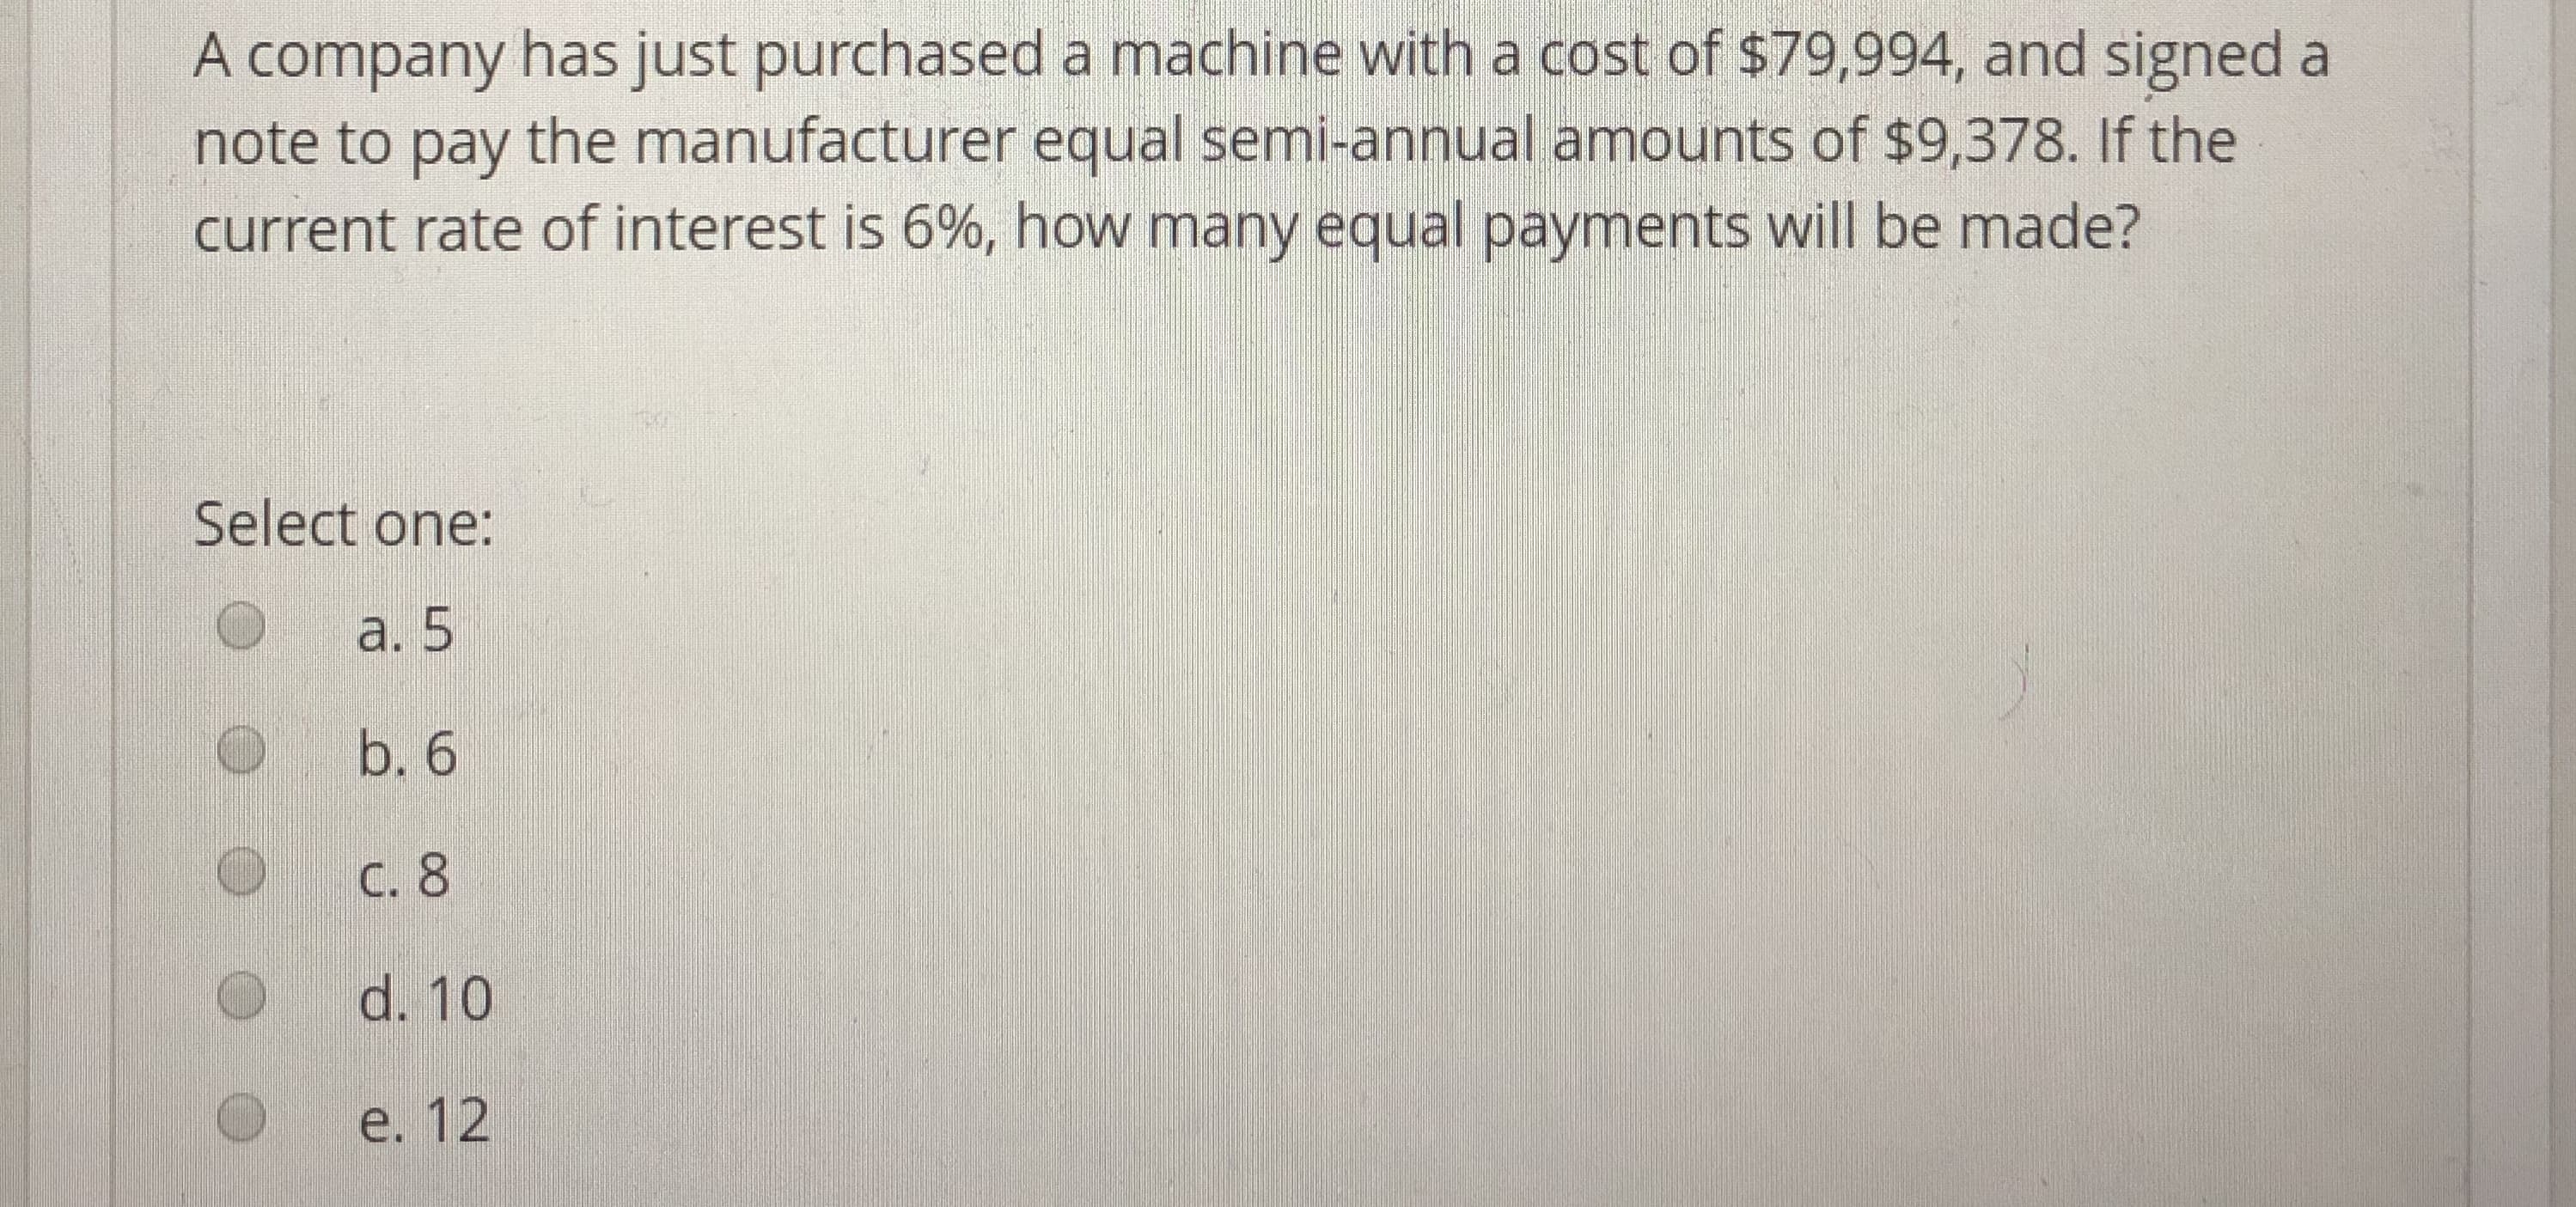 A company has just purchased a machine with a cost of s79,994, and signed a
note to pay the manufacturer equal semi-annual amounts of $9,378. If the
current rate of interest is 6%, how many equal payments will be made?
Select one:
a. 5
O b. 6
O C. 8
d. 10
e. 12
